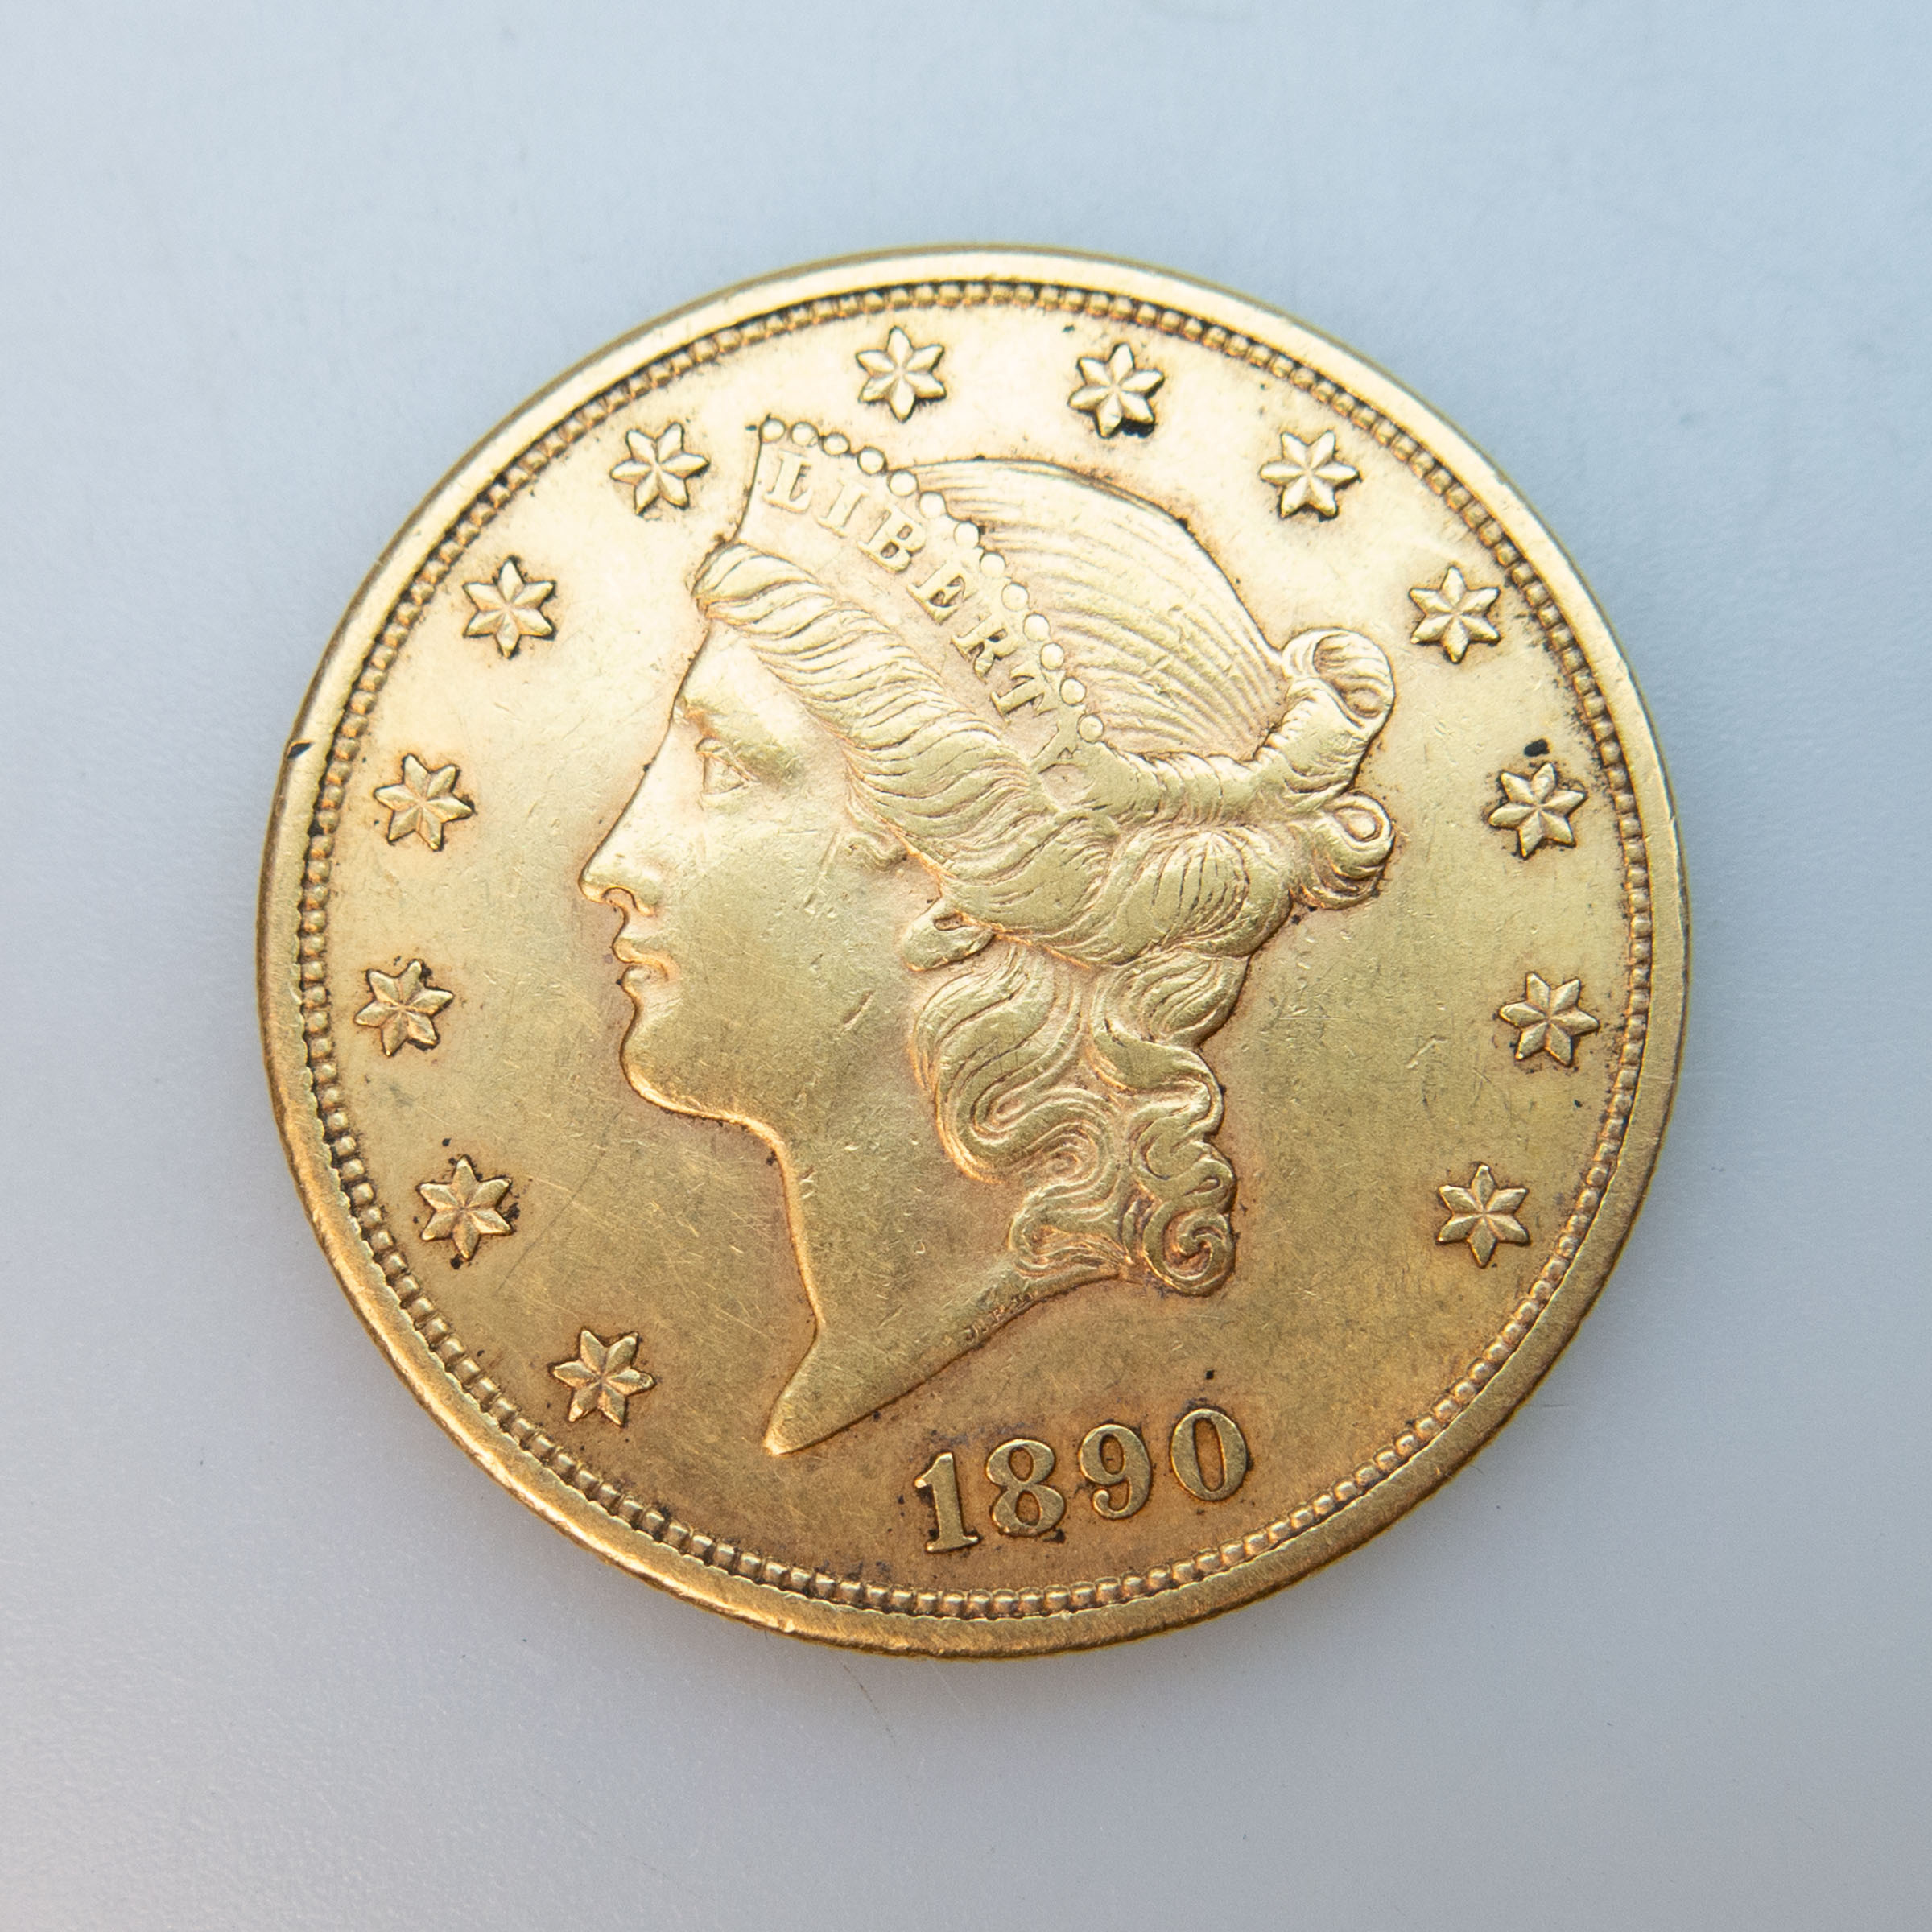 American 1890S $20 Double Eagle Gold Coin